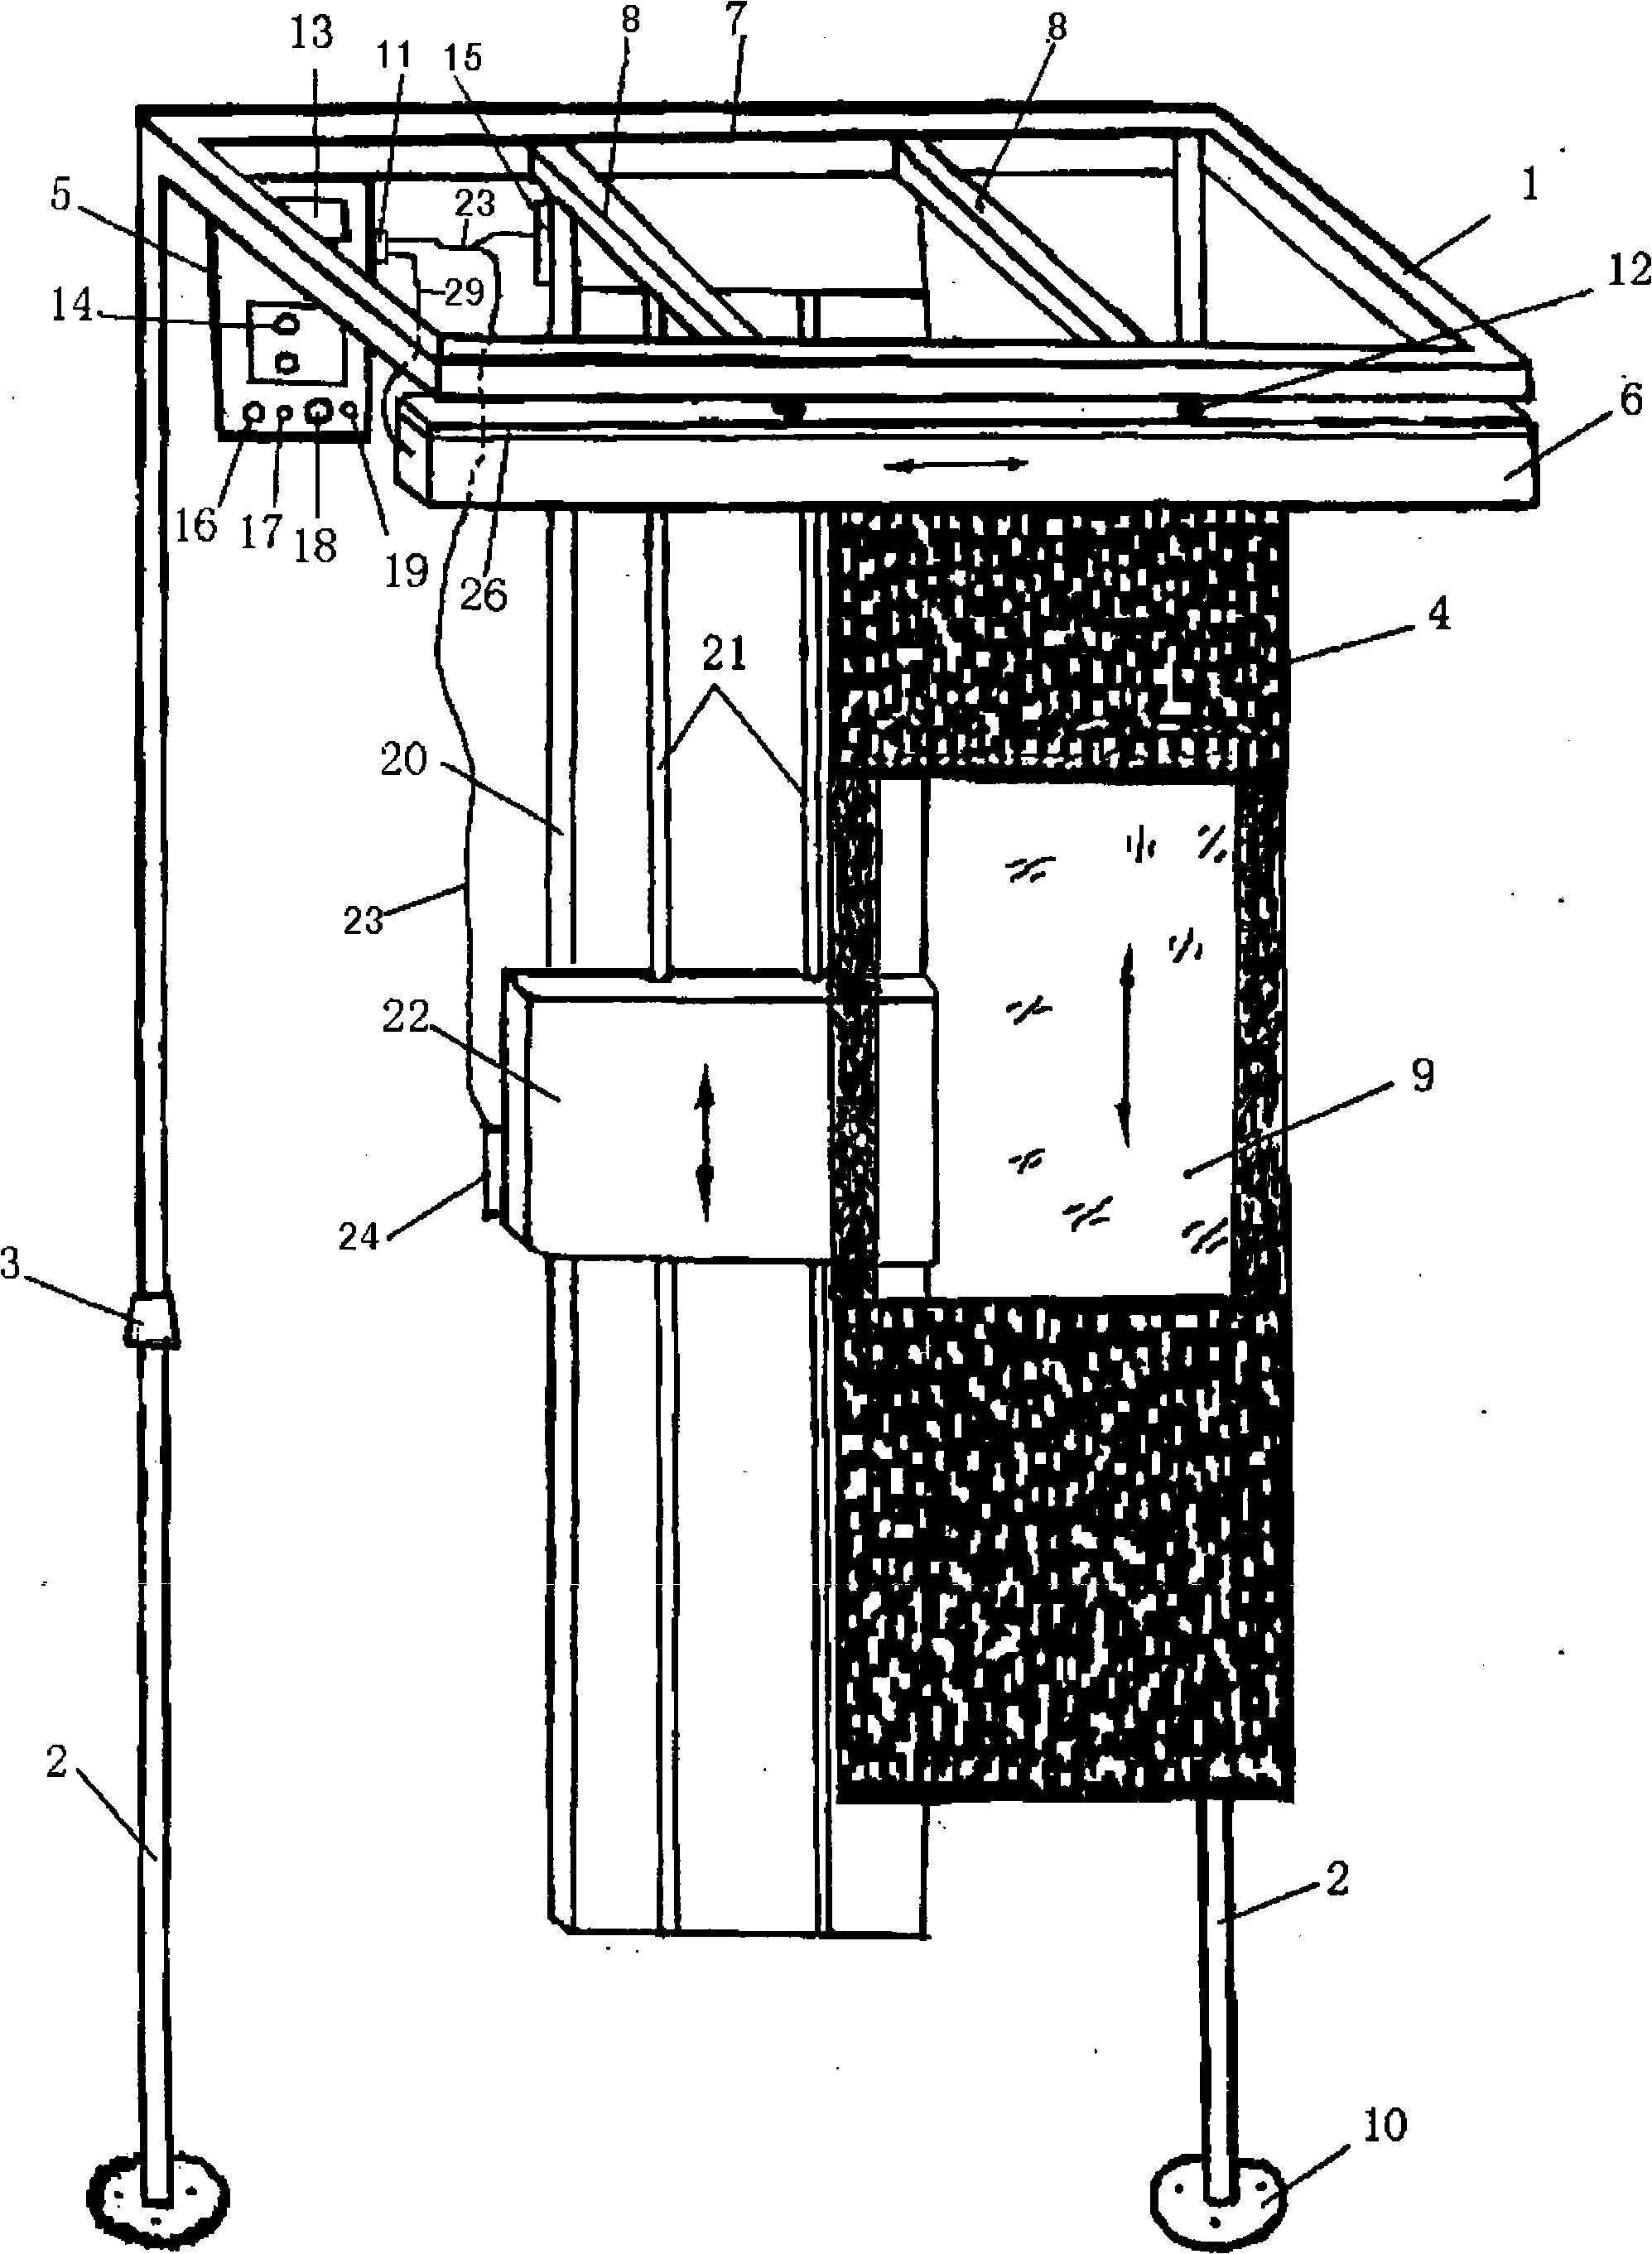 Automatic protection device for preventing medical radiation